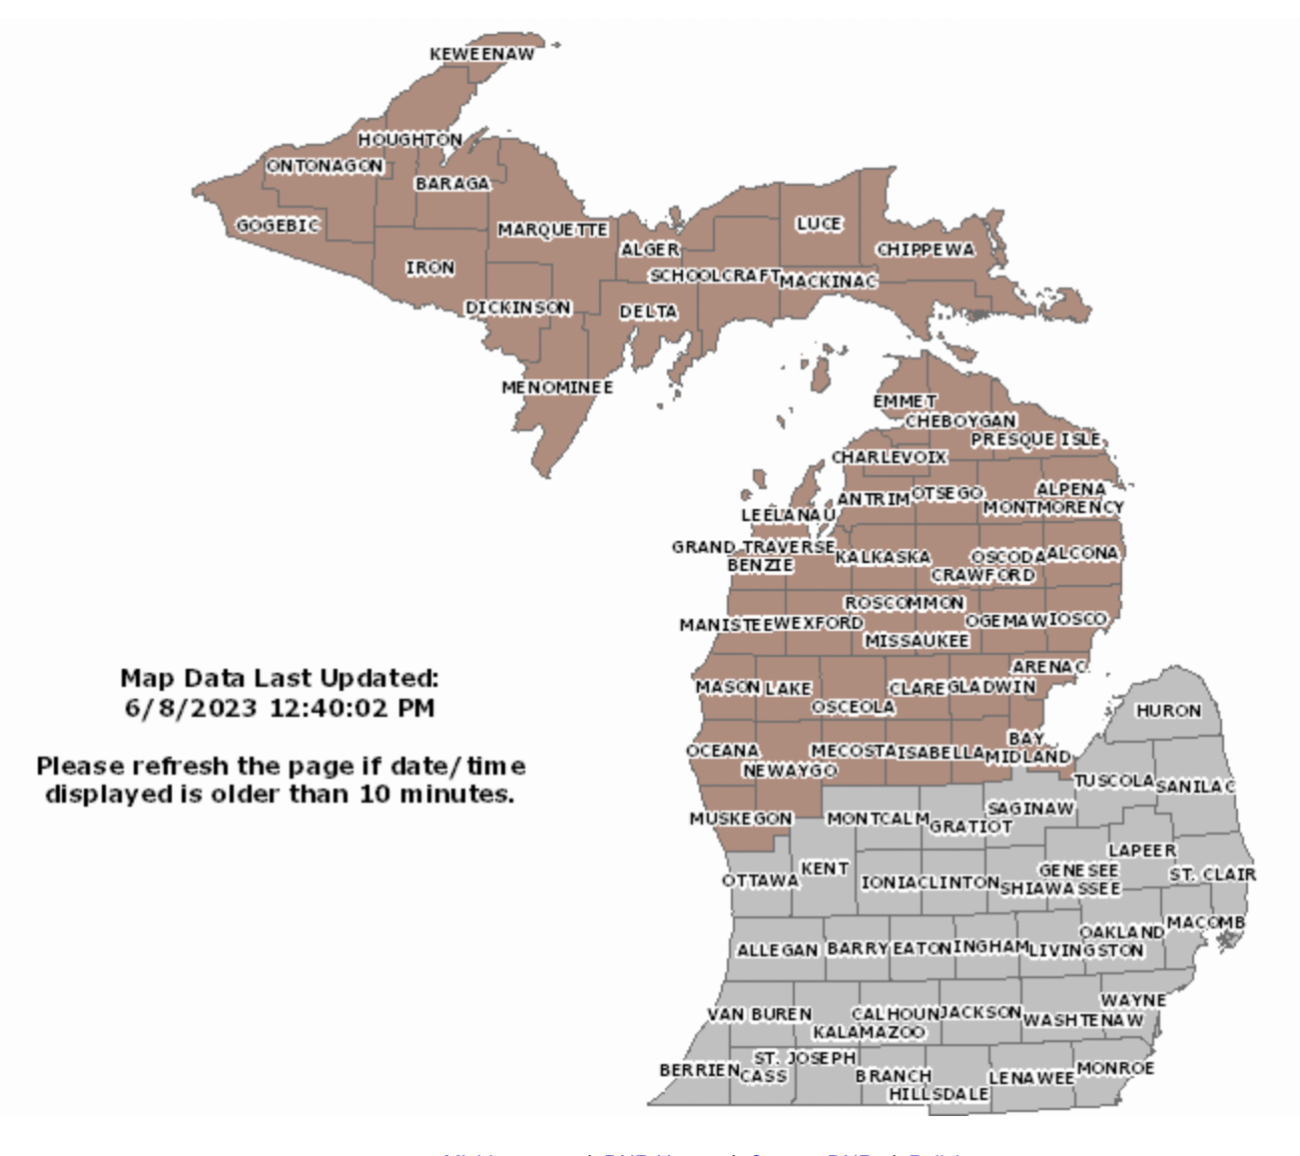 map of places that have banned burning debris in Michigan